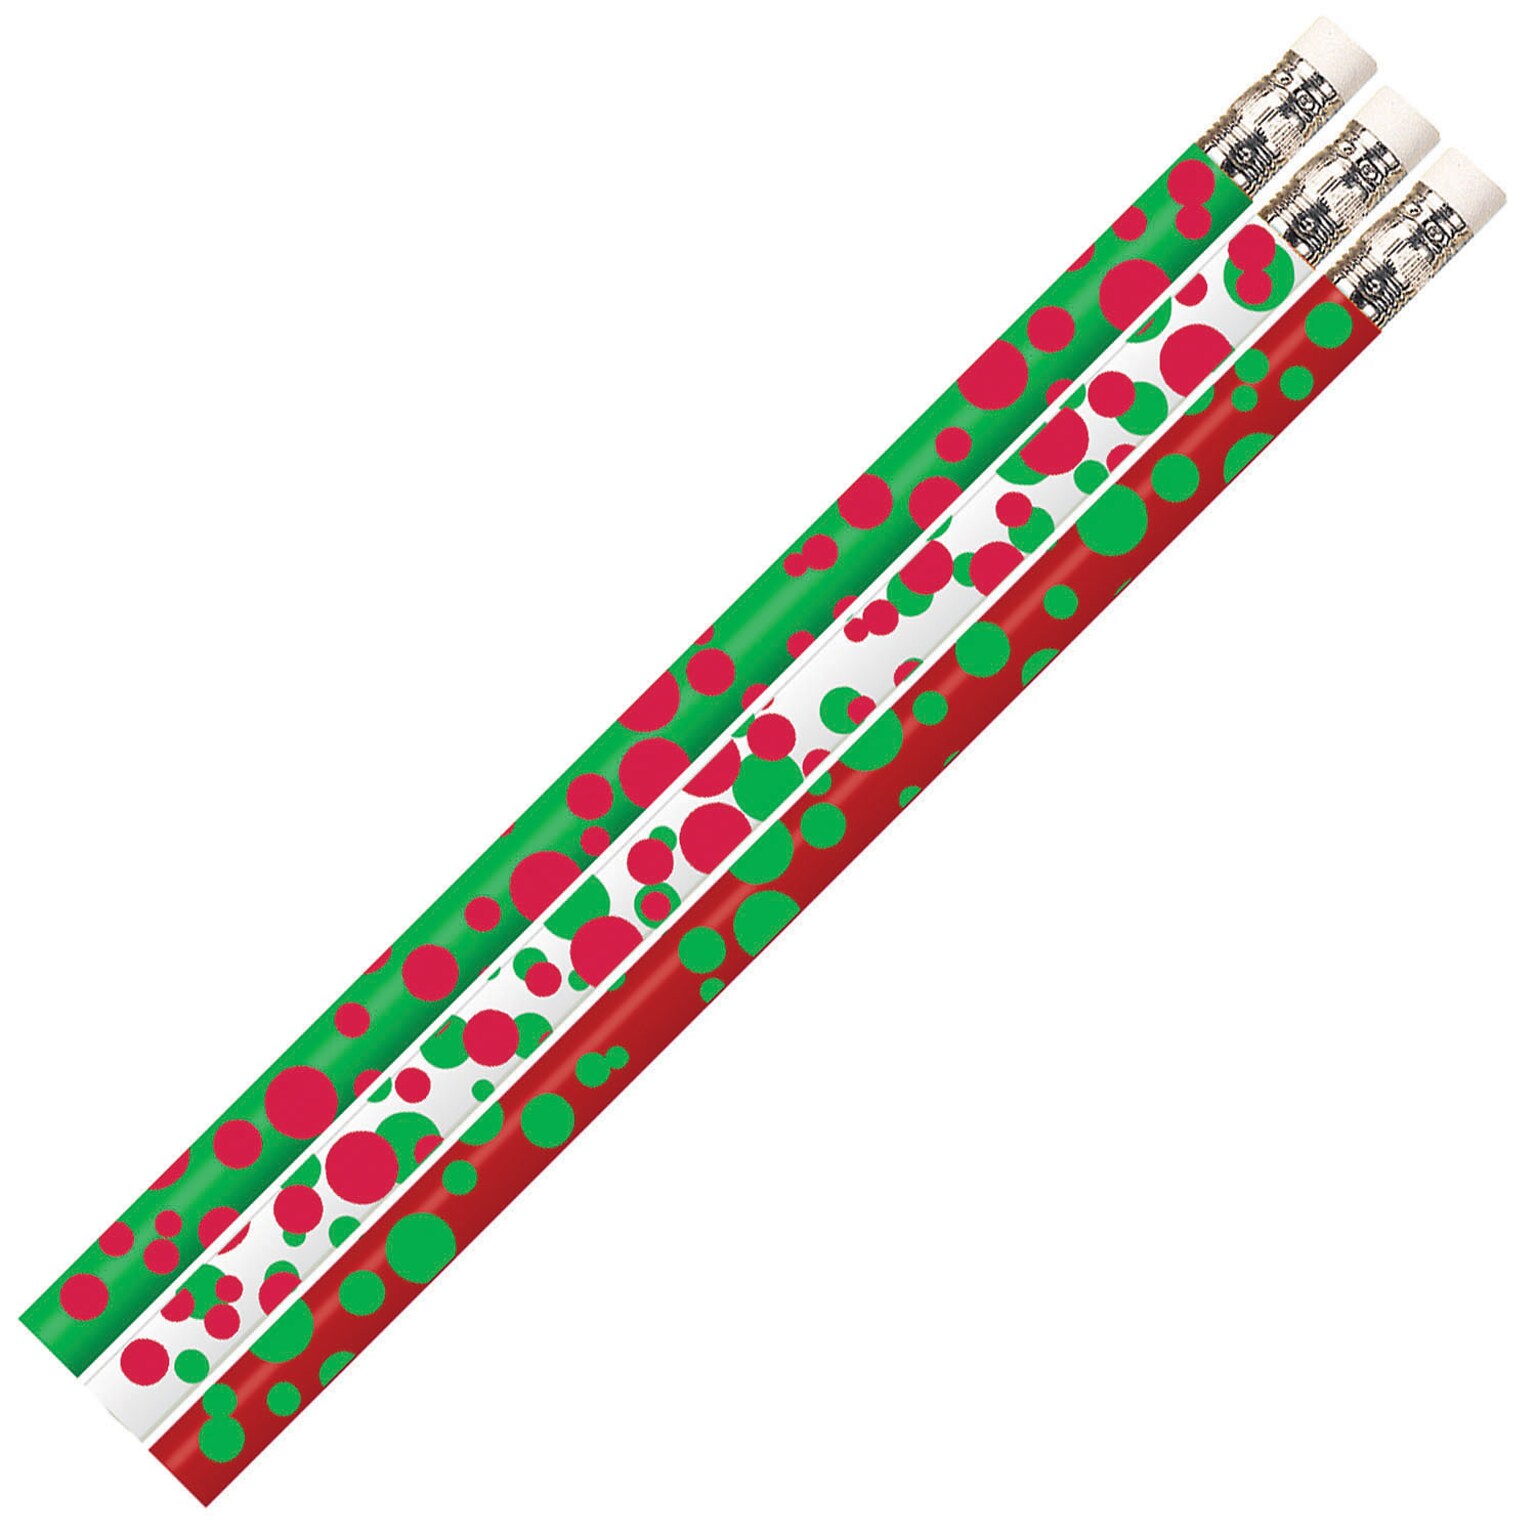 MUSGRAVE® Dots of Christmas Fun Motivational Pencils, Assorted Colors, Pack of 144 (MUS2528G)